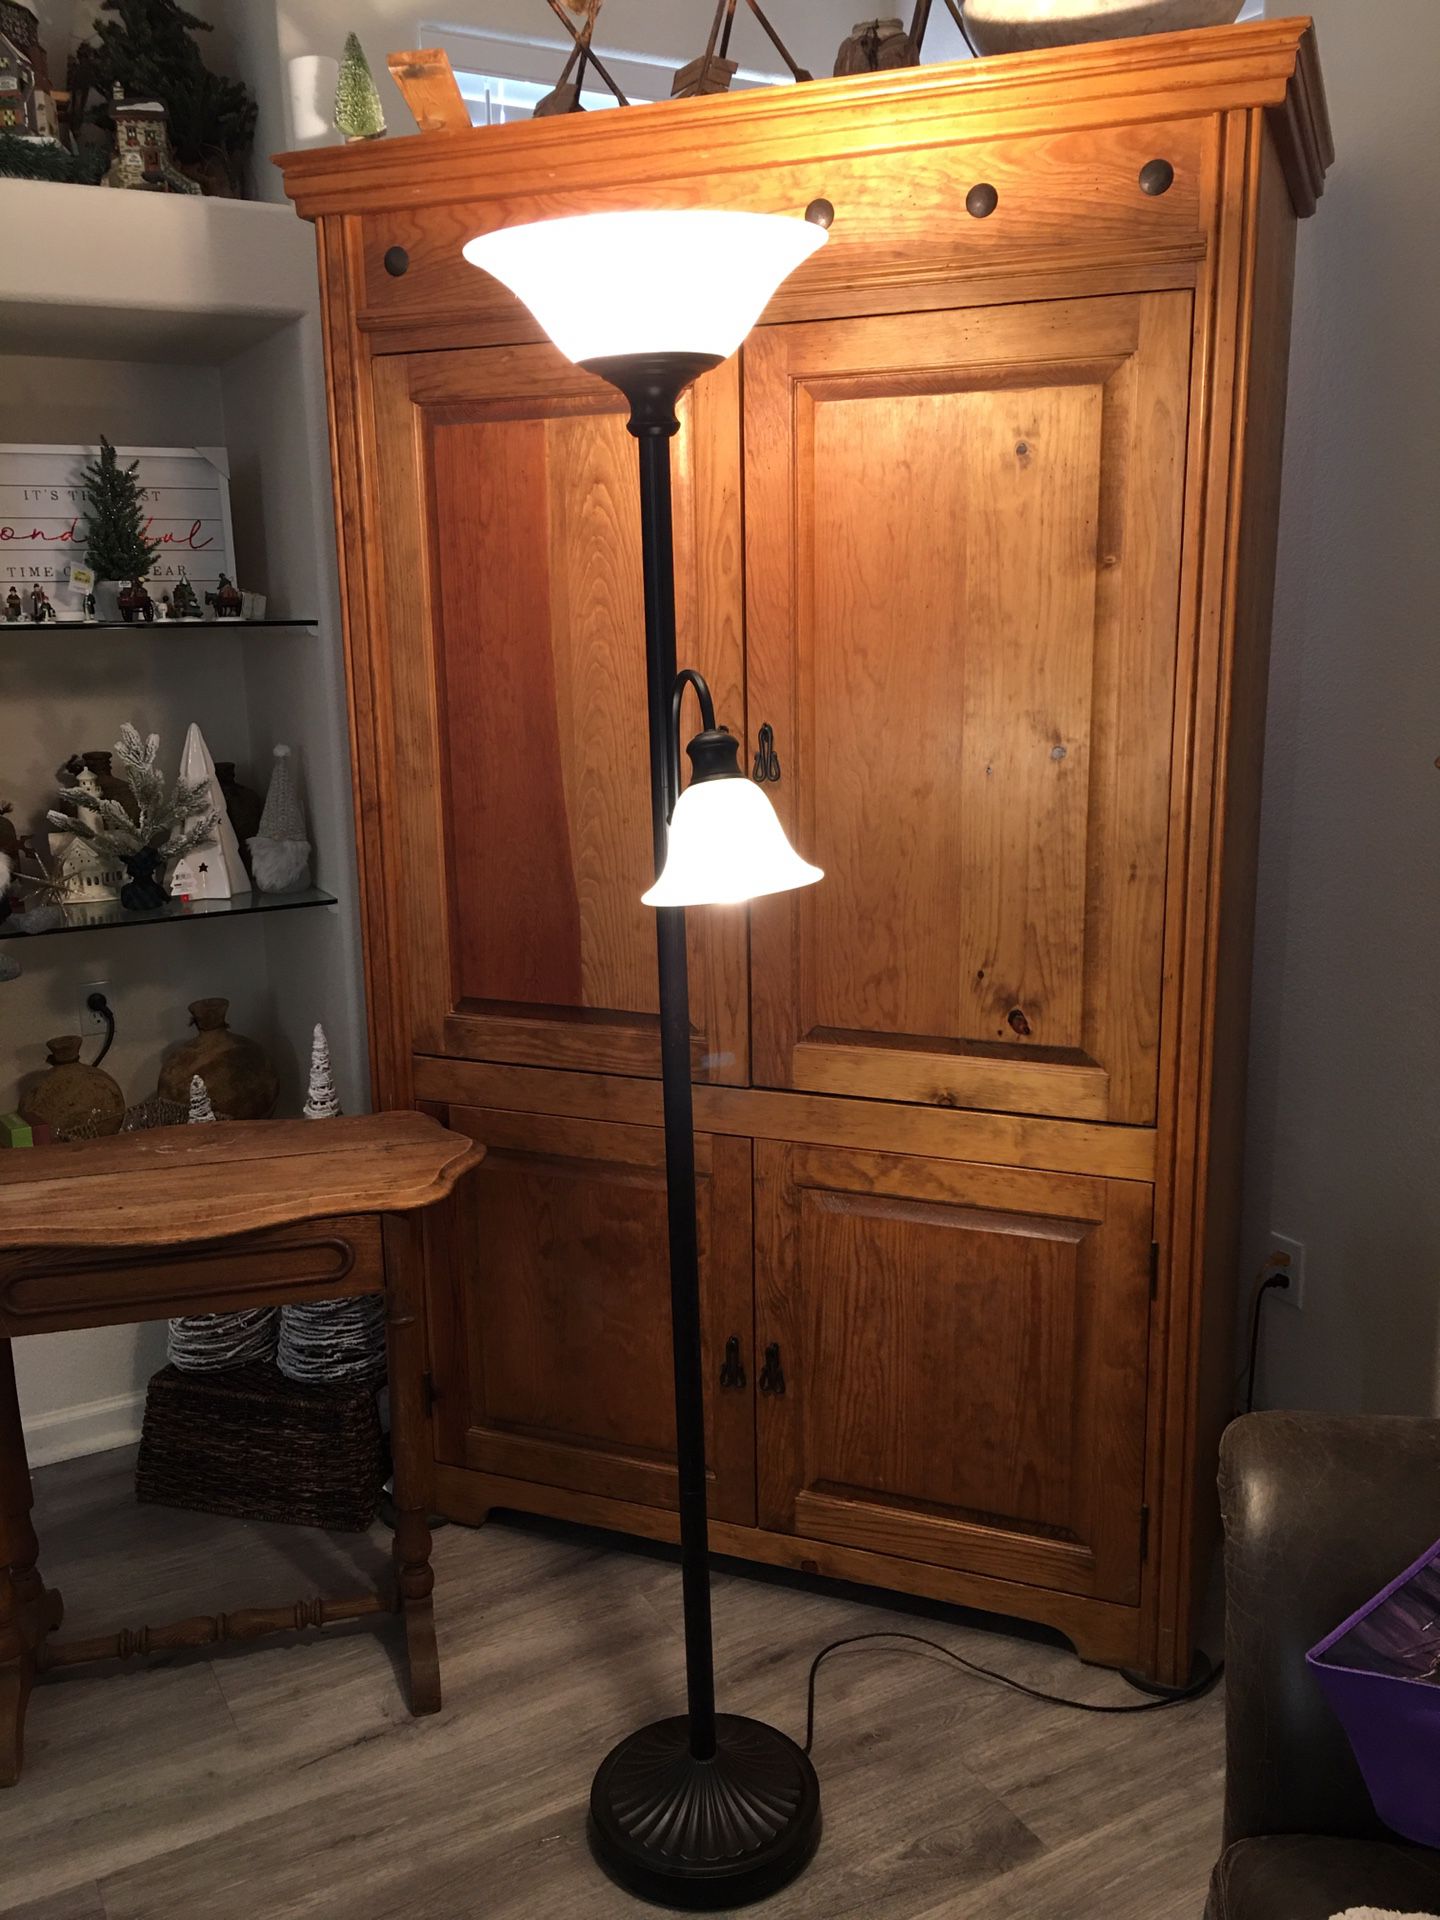 Floor Lamp With 2 Glass Shades $20 READ DESCRIPTION